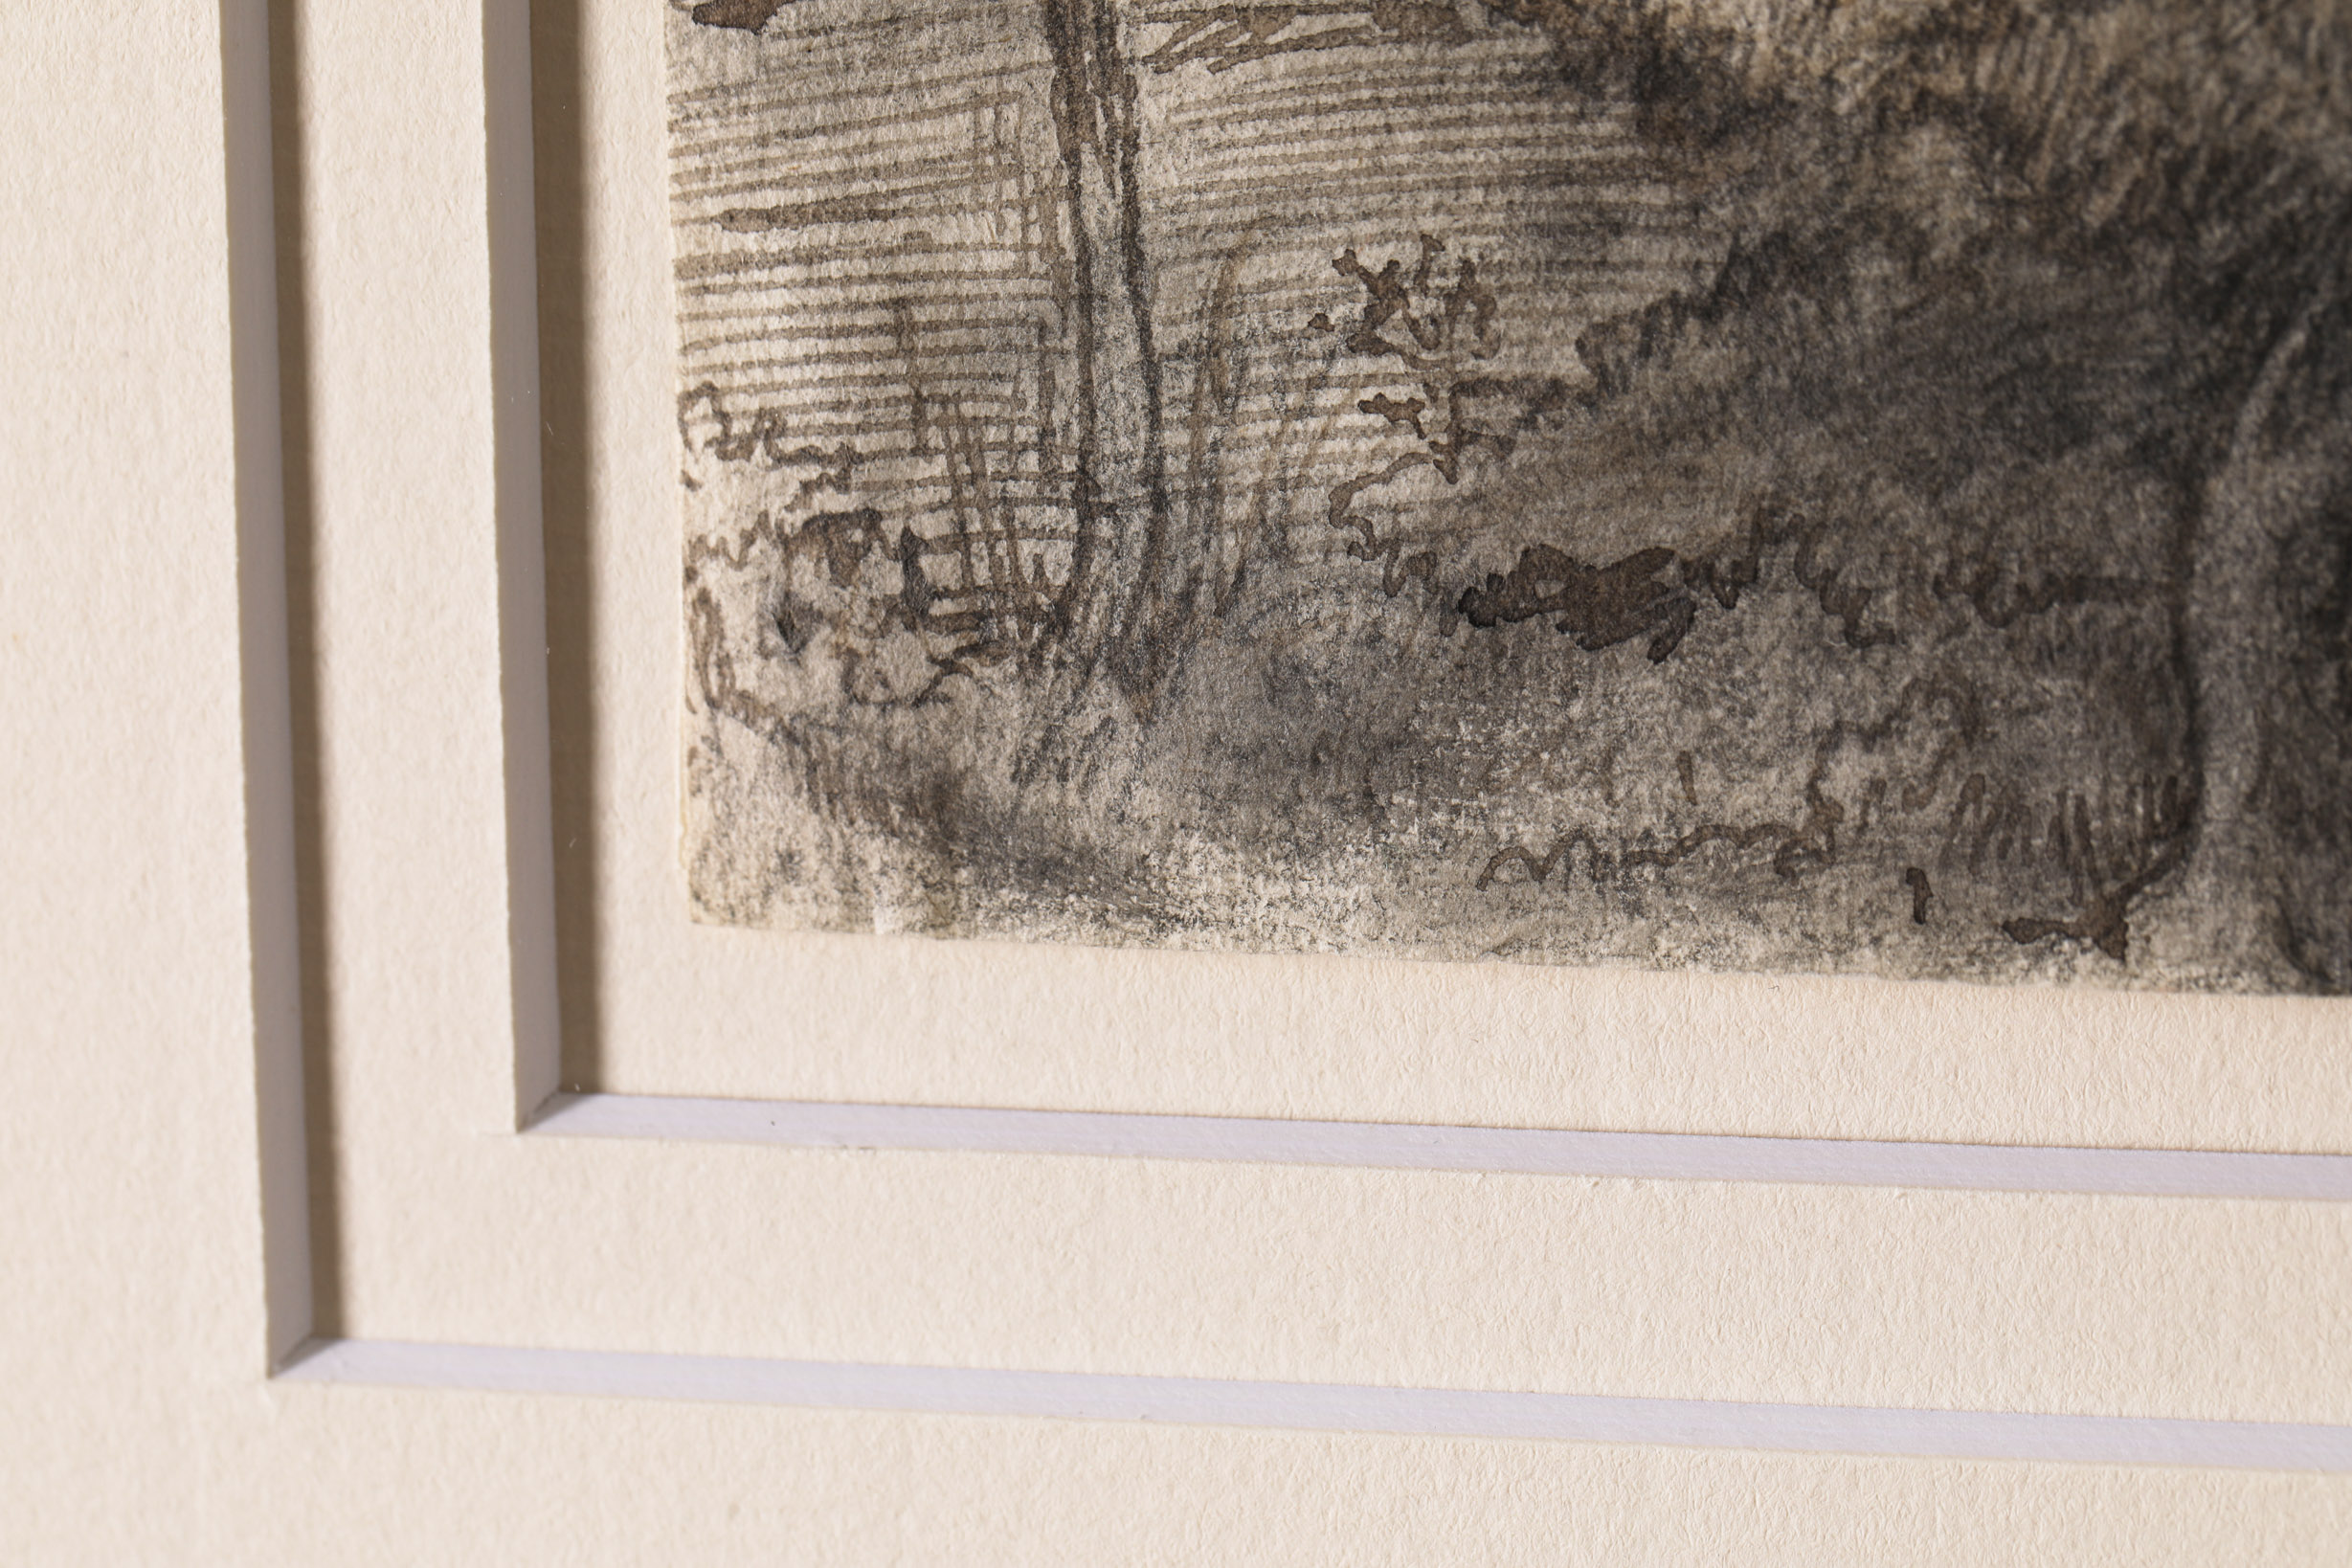 Edgar Degas, Drawing + Certificate, landscape with leaning tree - Image 3 of 4